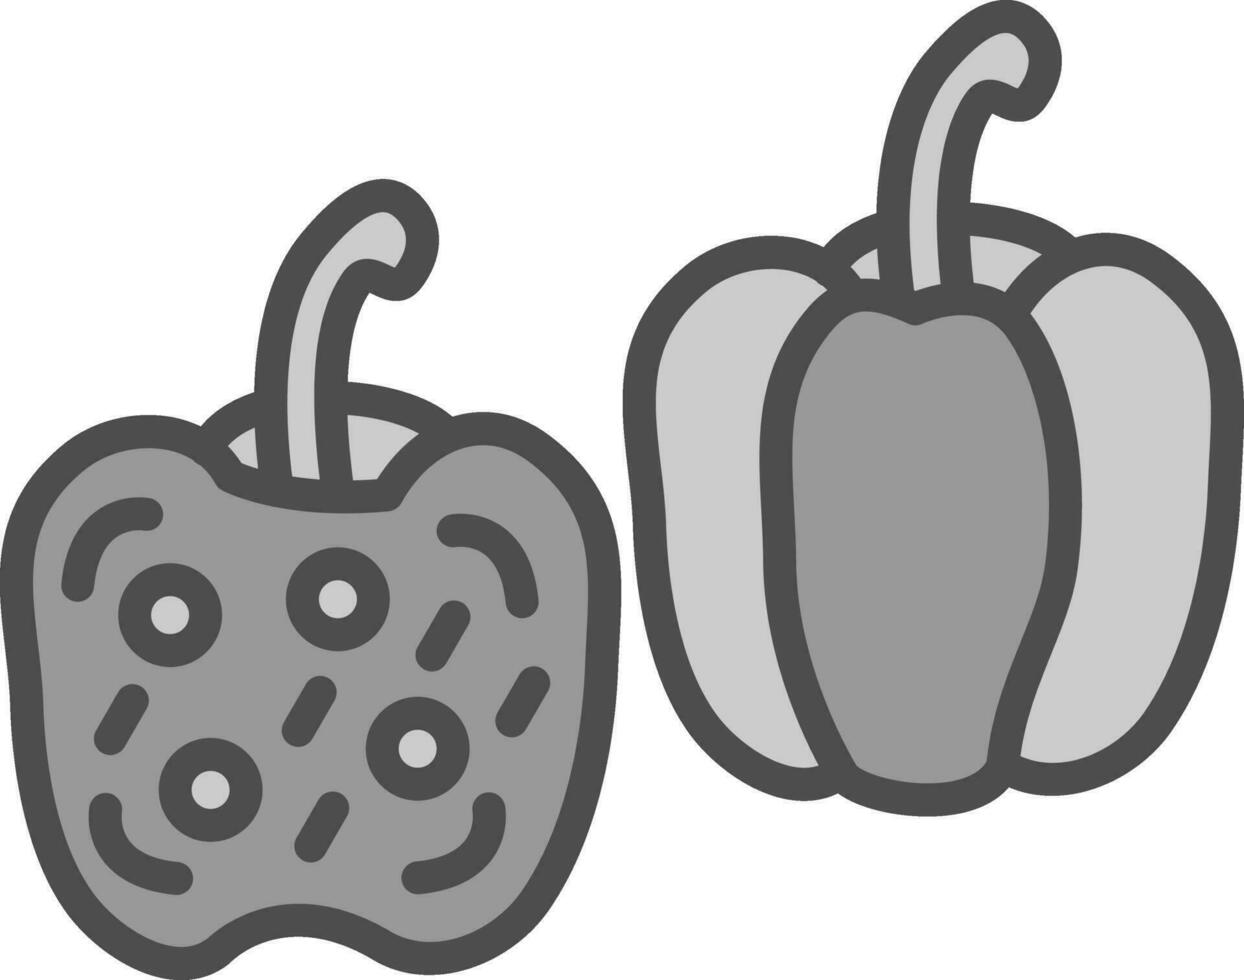 Stuffed Peppers Vector Icon Design